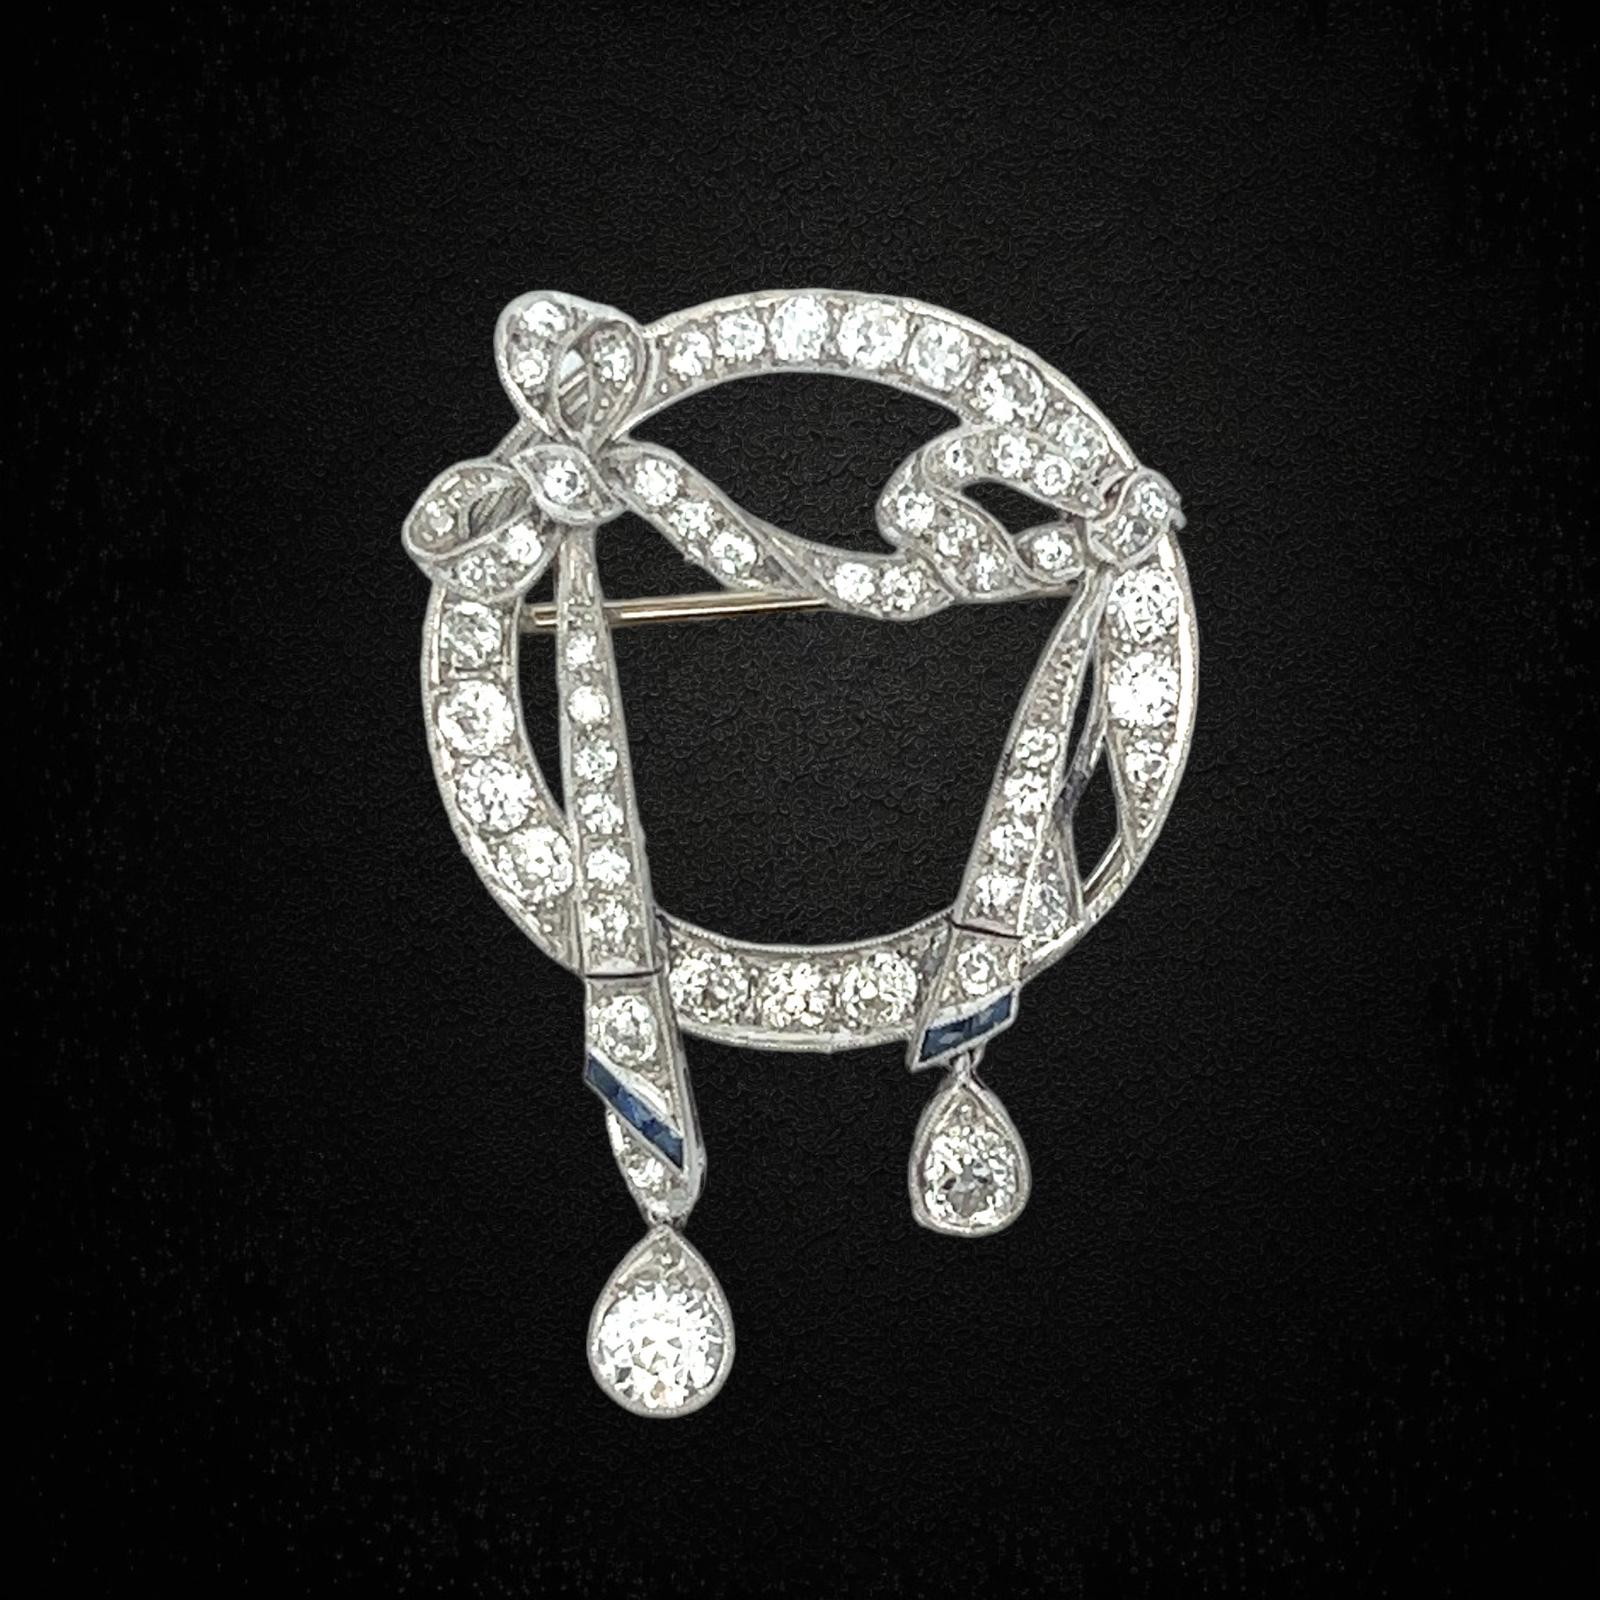 Original Art Deco diamond sapphire bow brooch handcrafted in platinum. The brooch features 2 Old European cut diamond drops weighing approximately 1.00 carat total weight and another 52 old Europan cut diamonds weighing approximately 3.50 carat